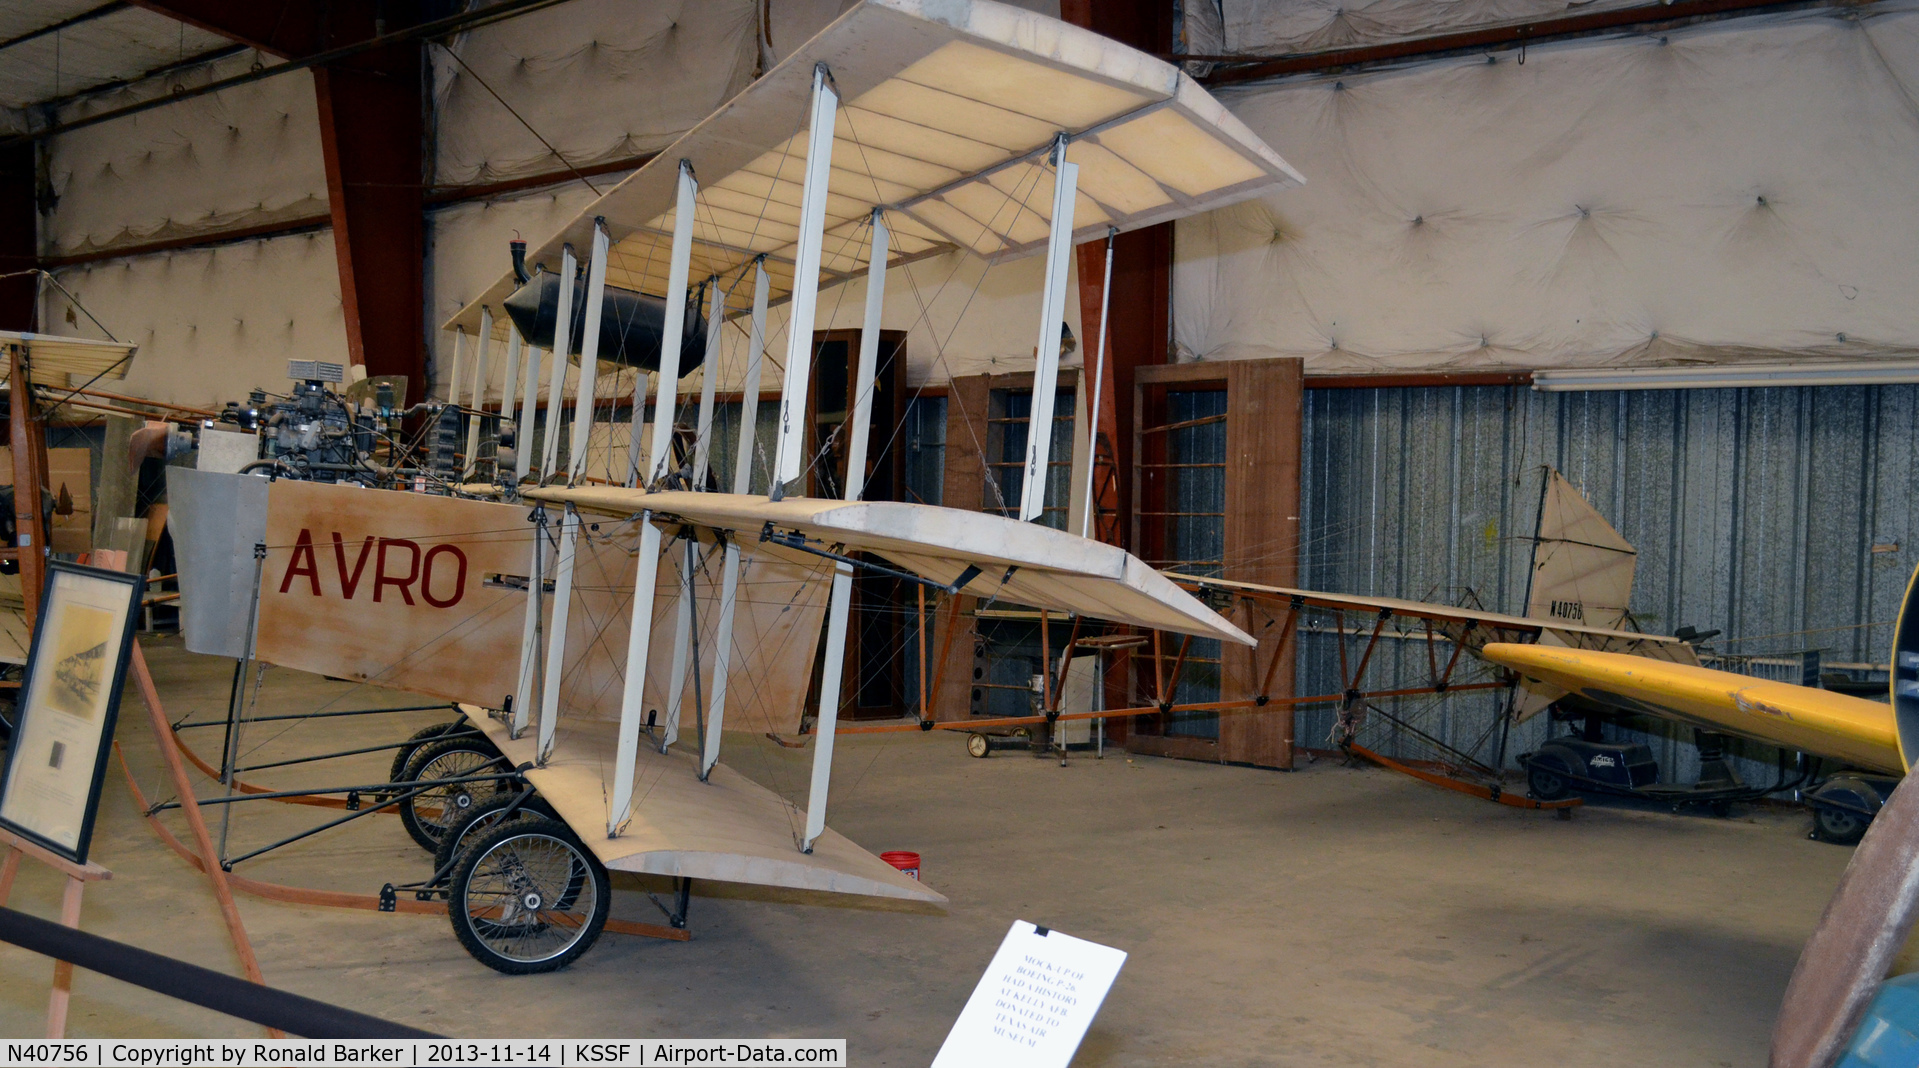 N40756, 1994 Avro 1910 Triplane Mk.4 Replica C/N 003, 80% scale replica built by Julius Jung.  After taxi test, it went  to the Texas Air Museum